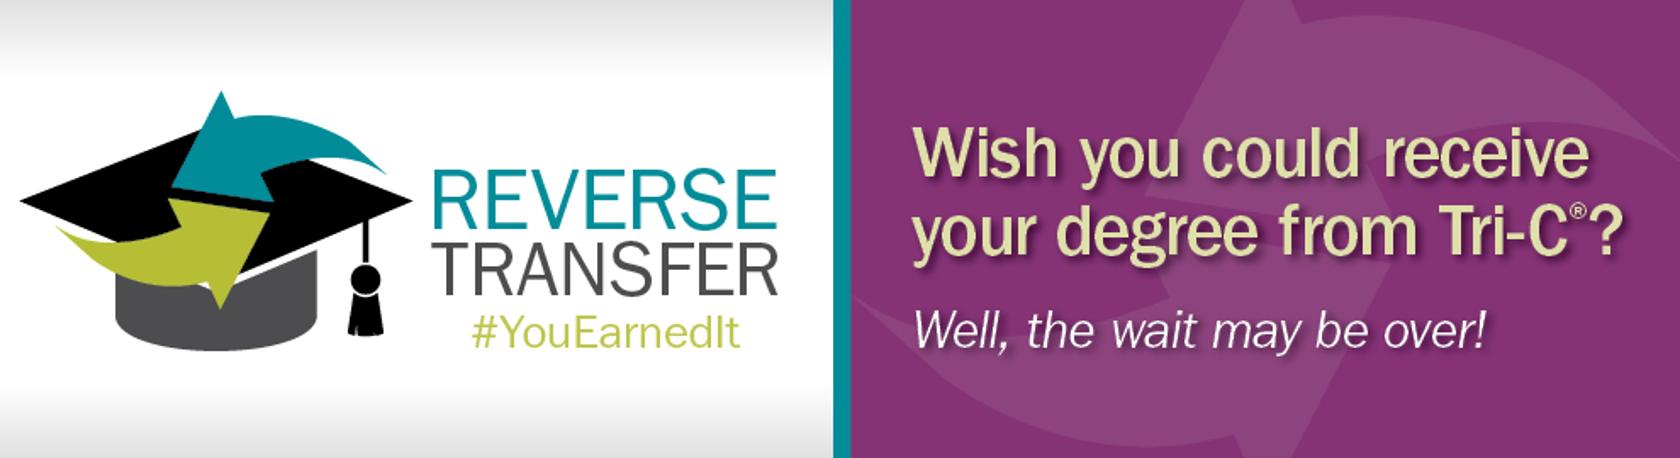 Web banner image: Reverse Transfer #YouEarnedIt; Wish you could receive your degree from Tri-C? Well, the wait may be over!